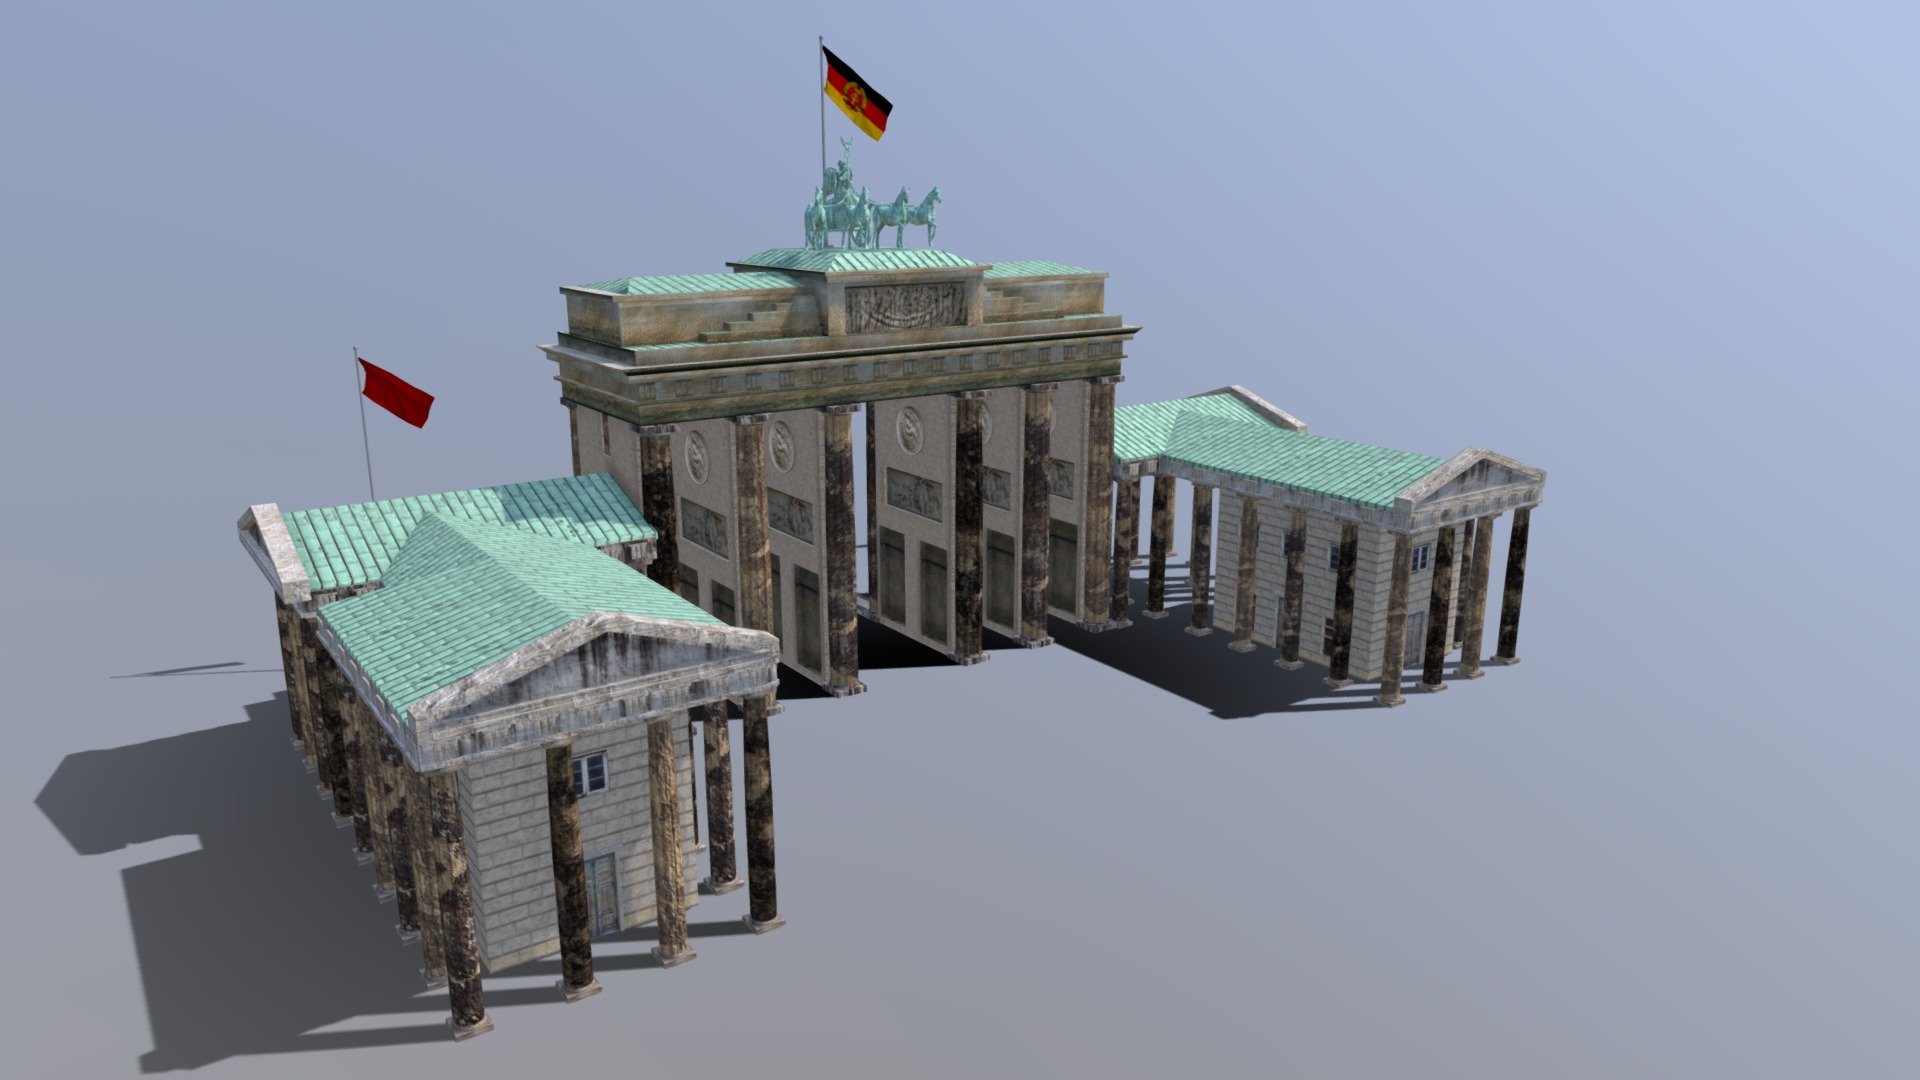 Berlin Brandenburg gate in cold war-era style.

Including max, obj and fbx formats.

With albedo, specular and normal  maps 3d model